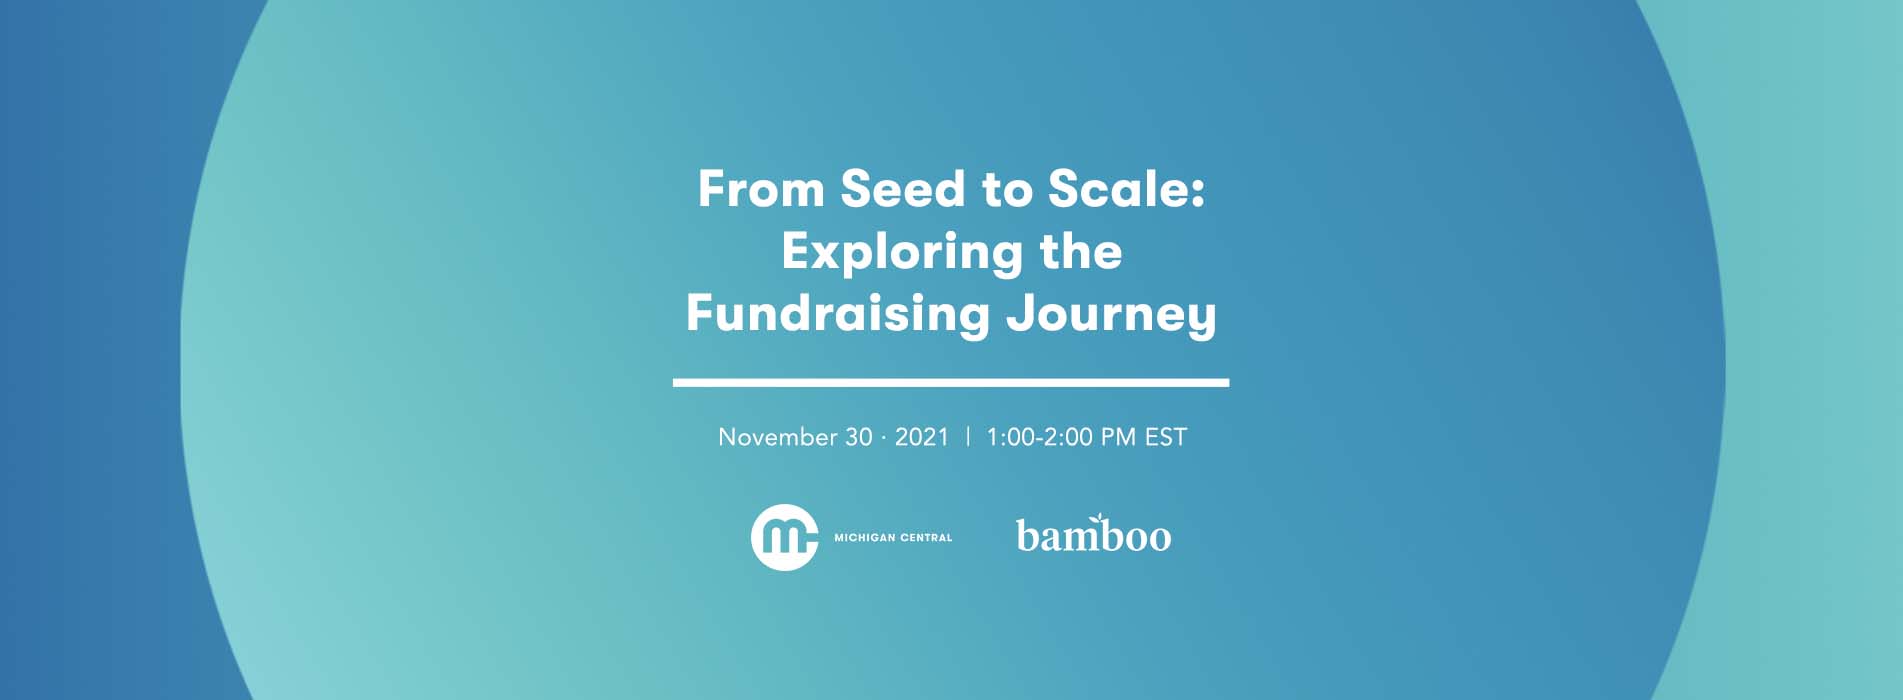 From Seed to Scale: Exploring the Fundraising Journey